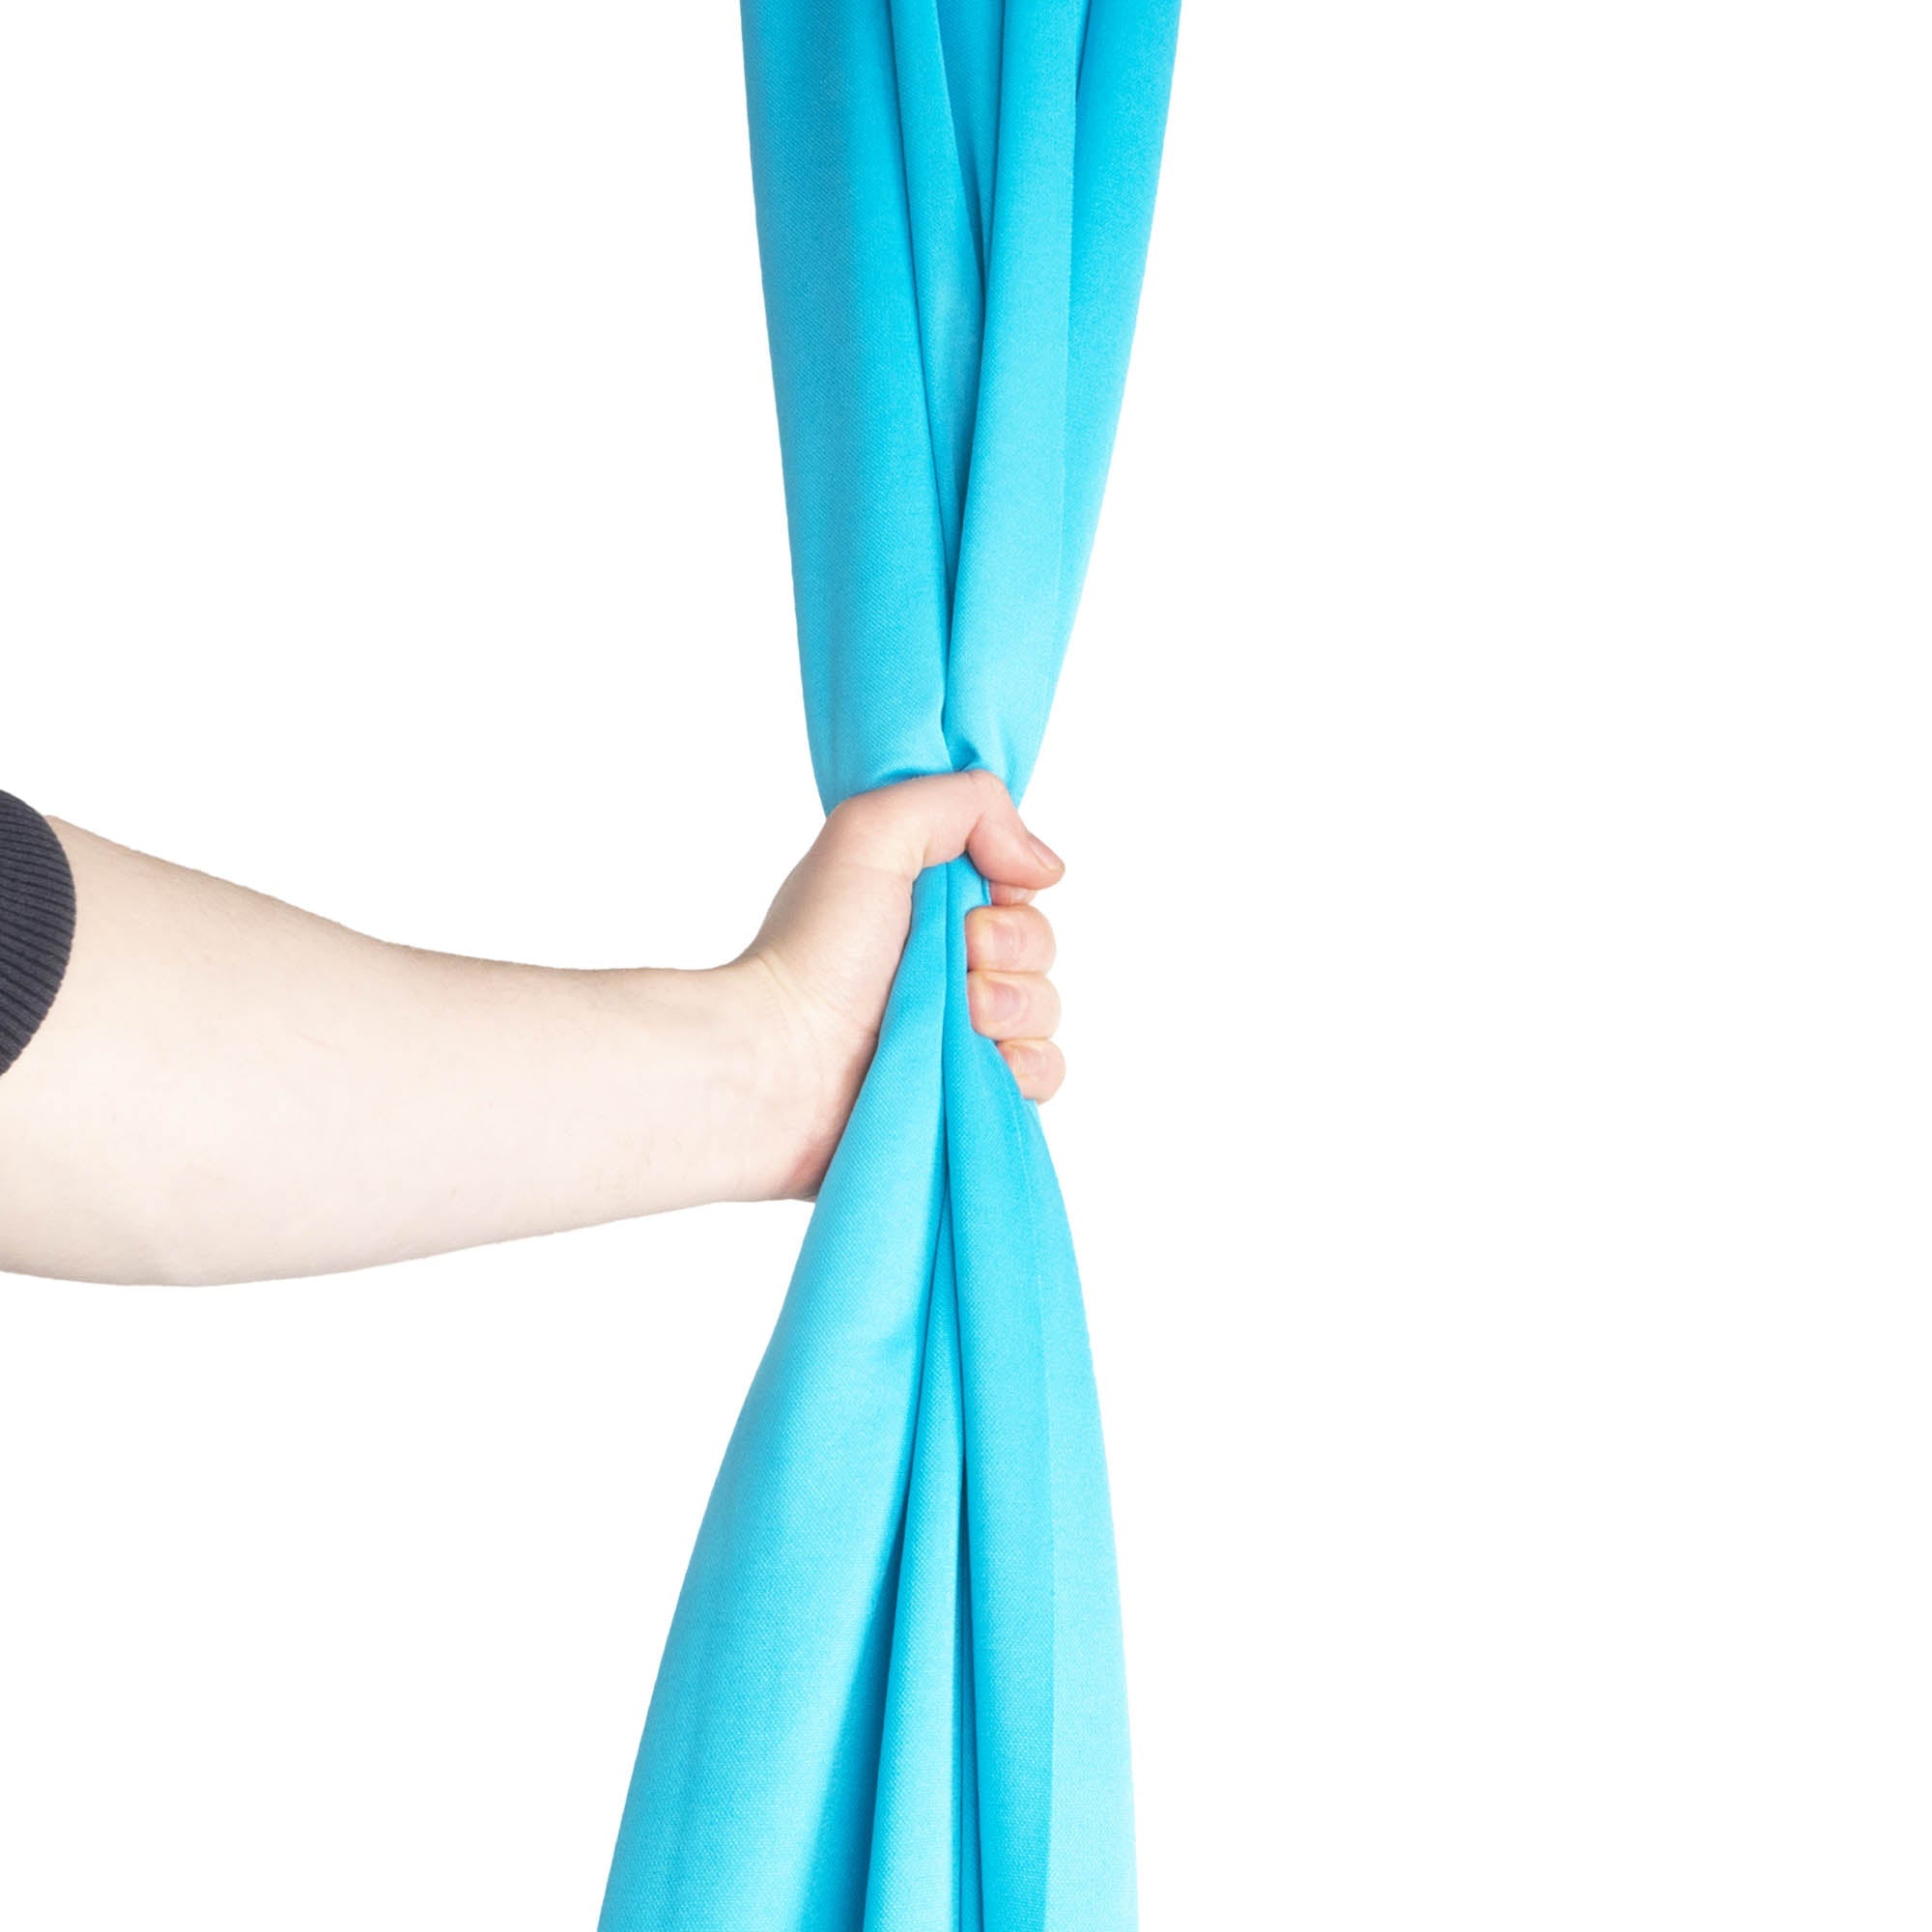 Firetoys youth aerial silk true turquoise in hand